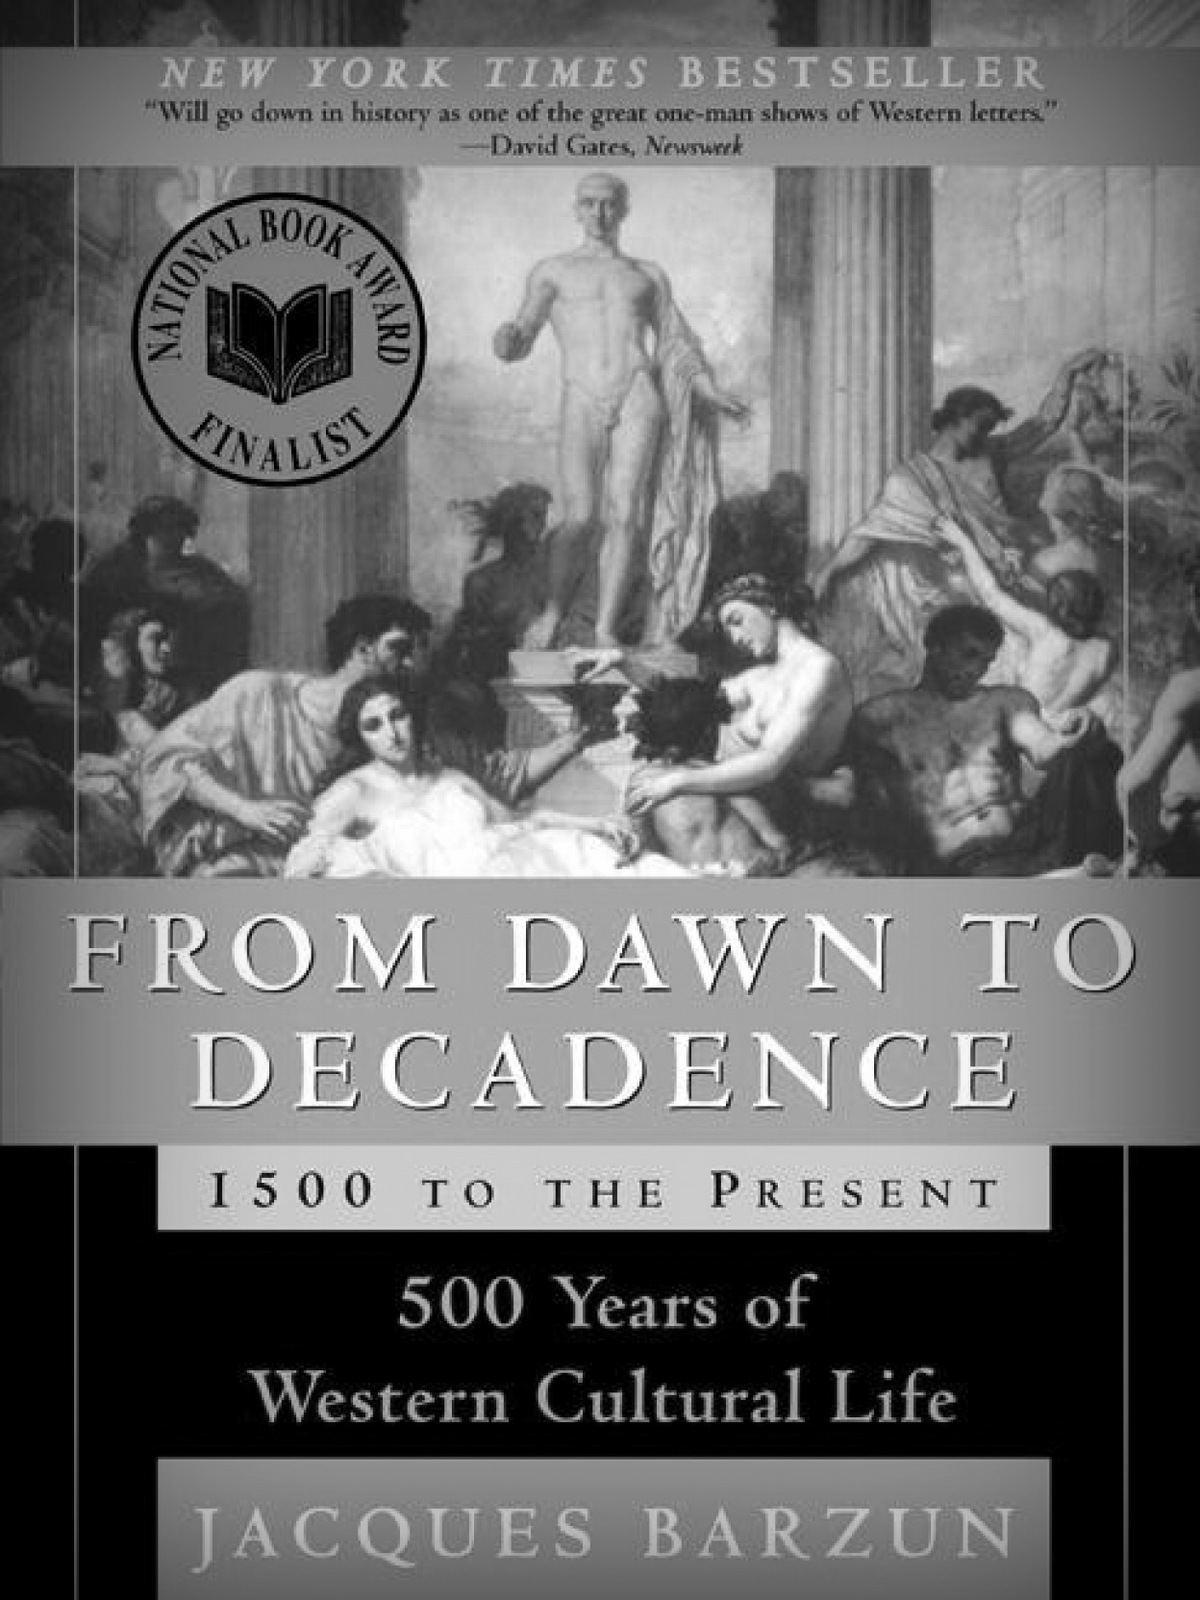 From Dawn to Decadence: 500 Years of Western Cultural Life, 1500 to the Present (2000) Book Cover